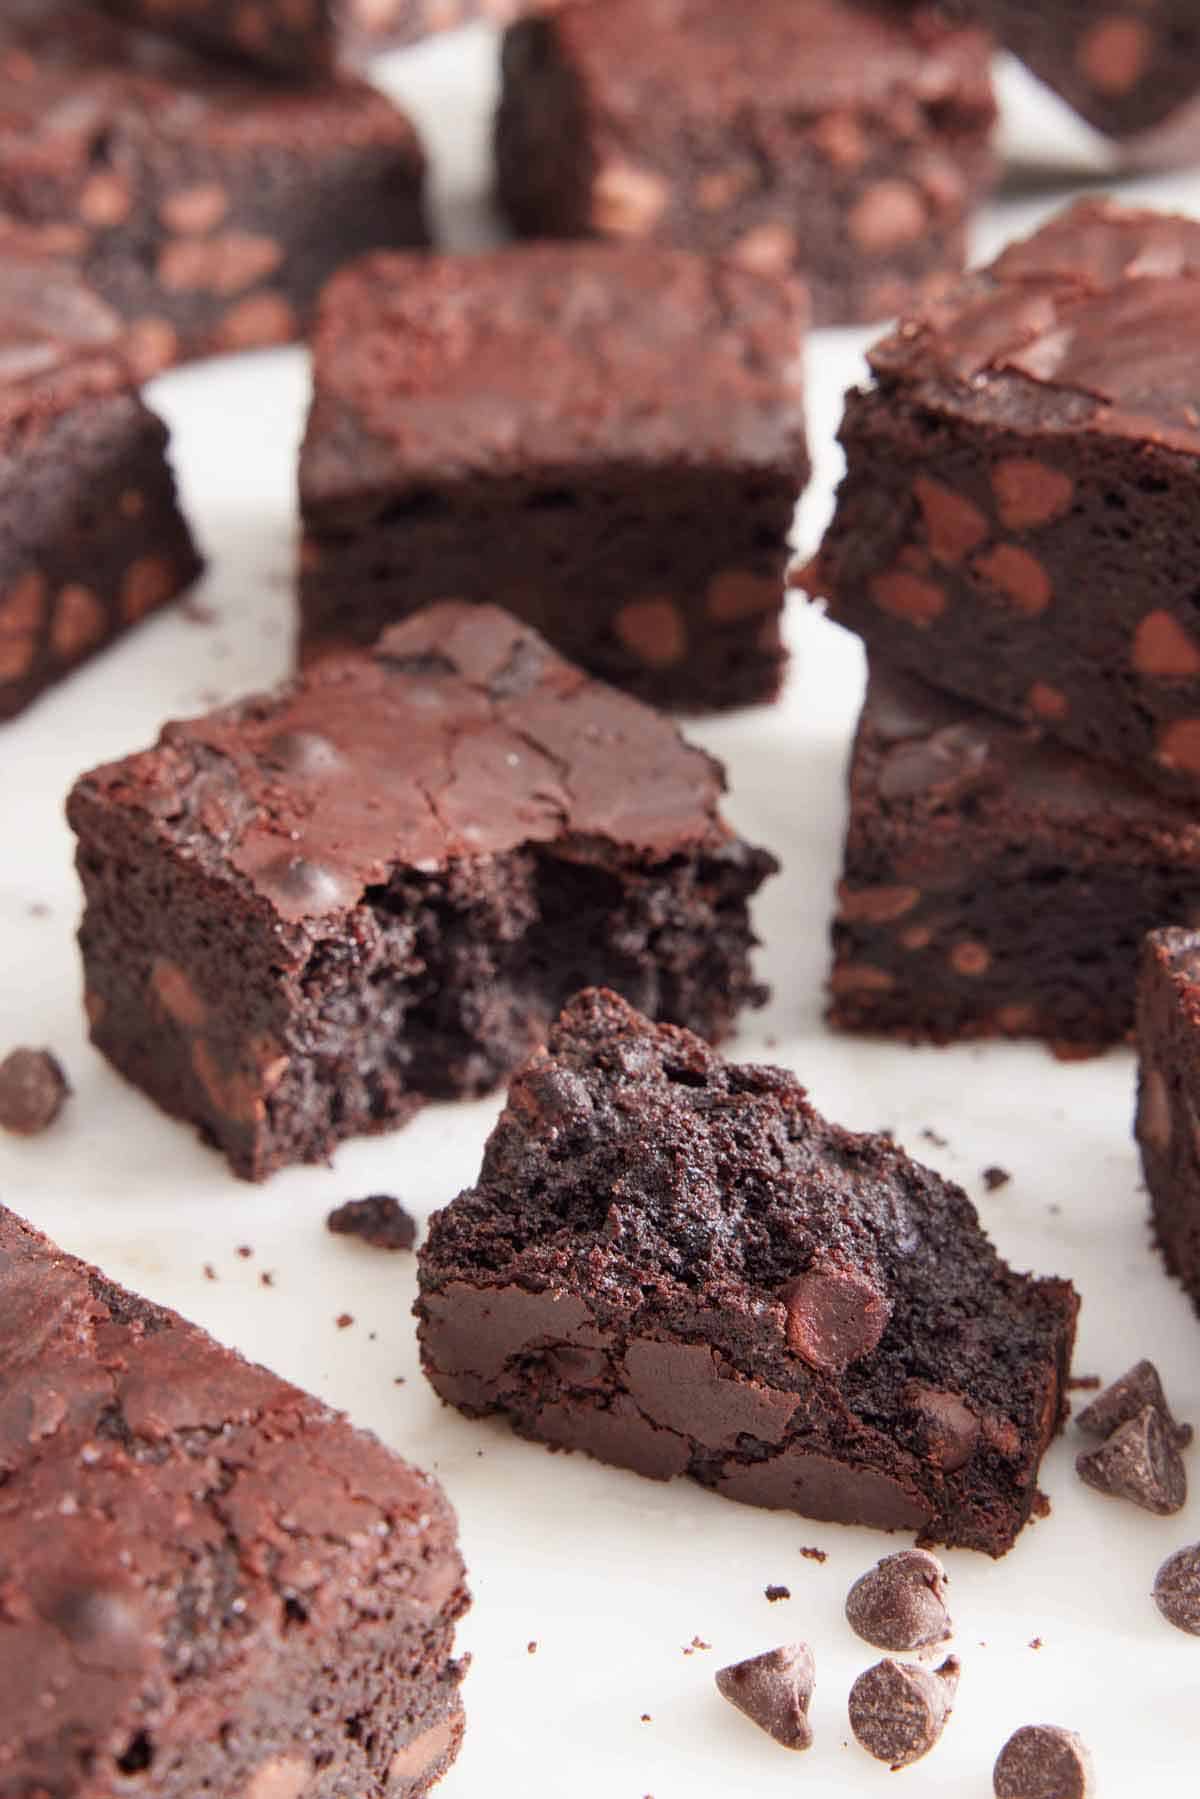 Multiple brownies on a flat surface with one in the middle torn open.